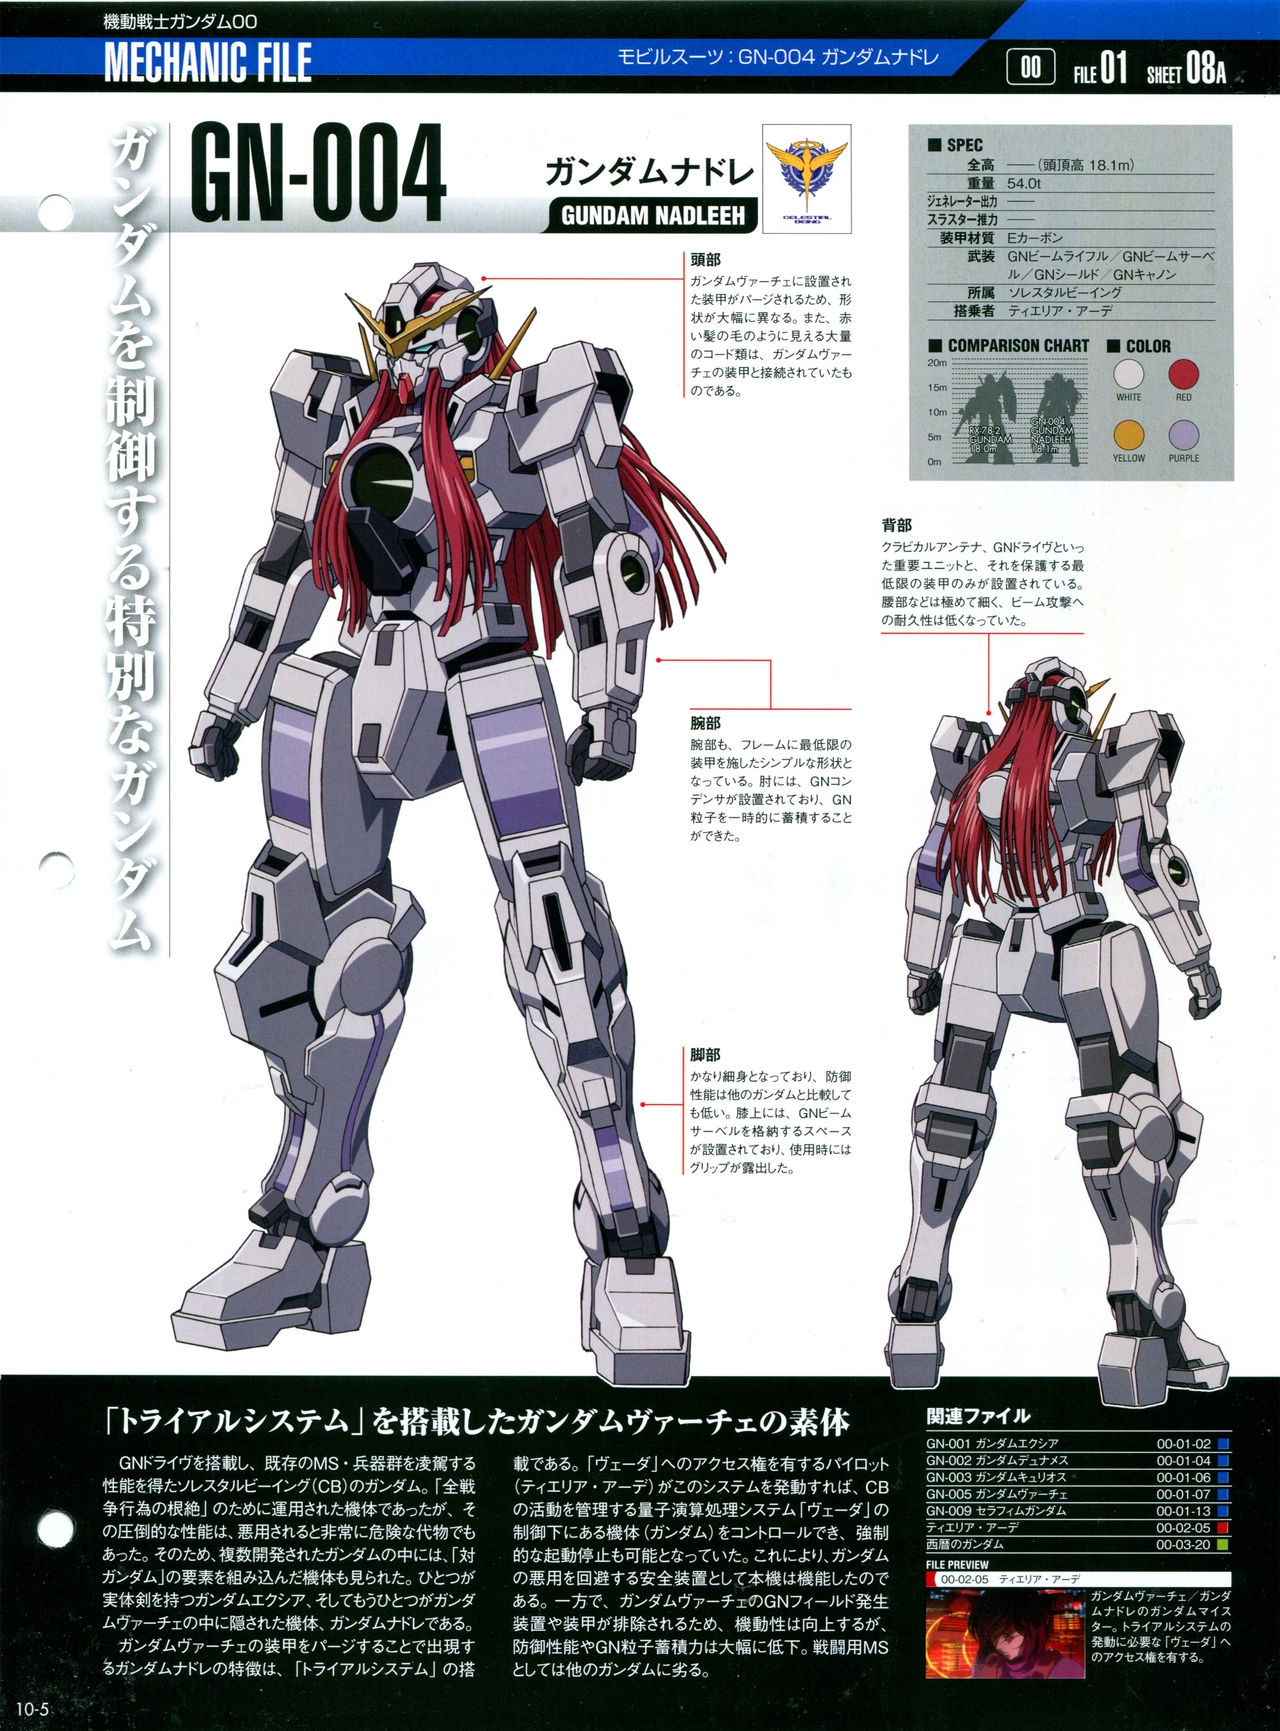 The Official Gundam Perfect File - No. 010 8